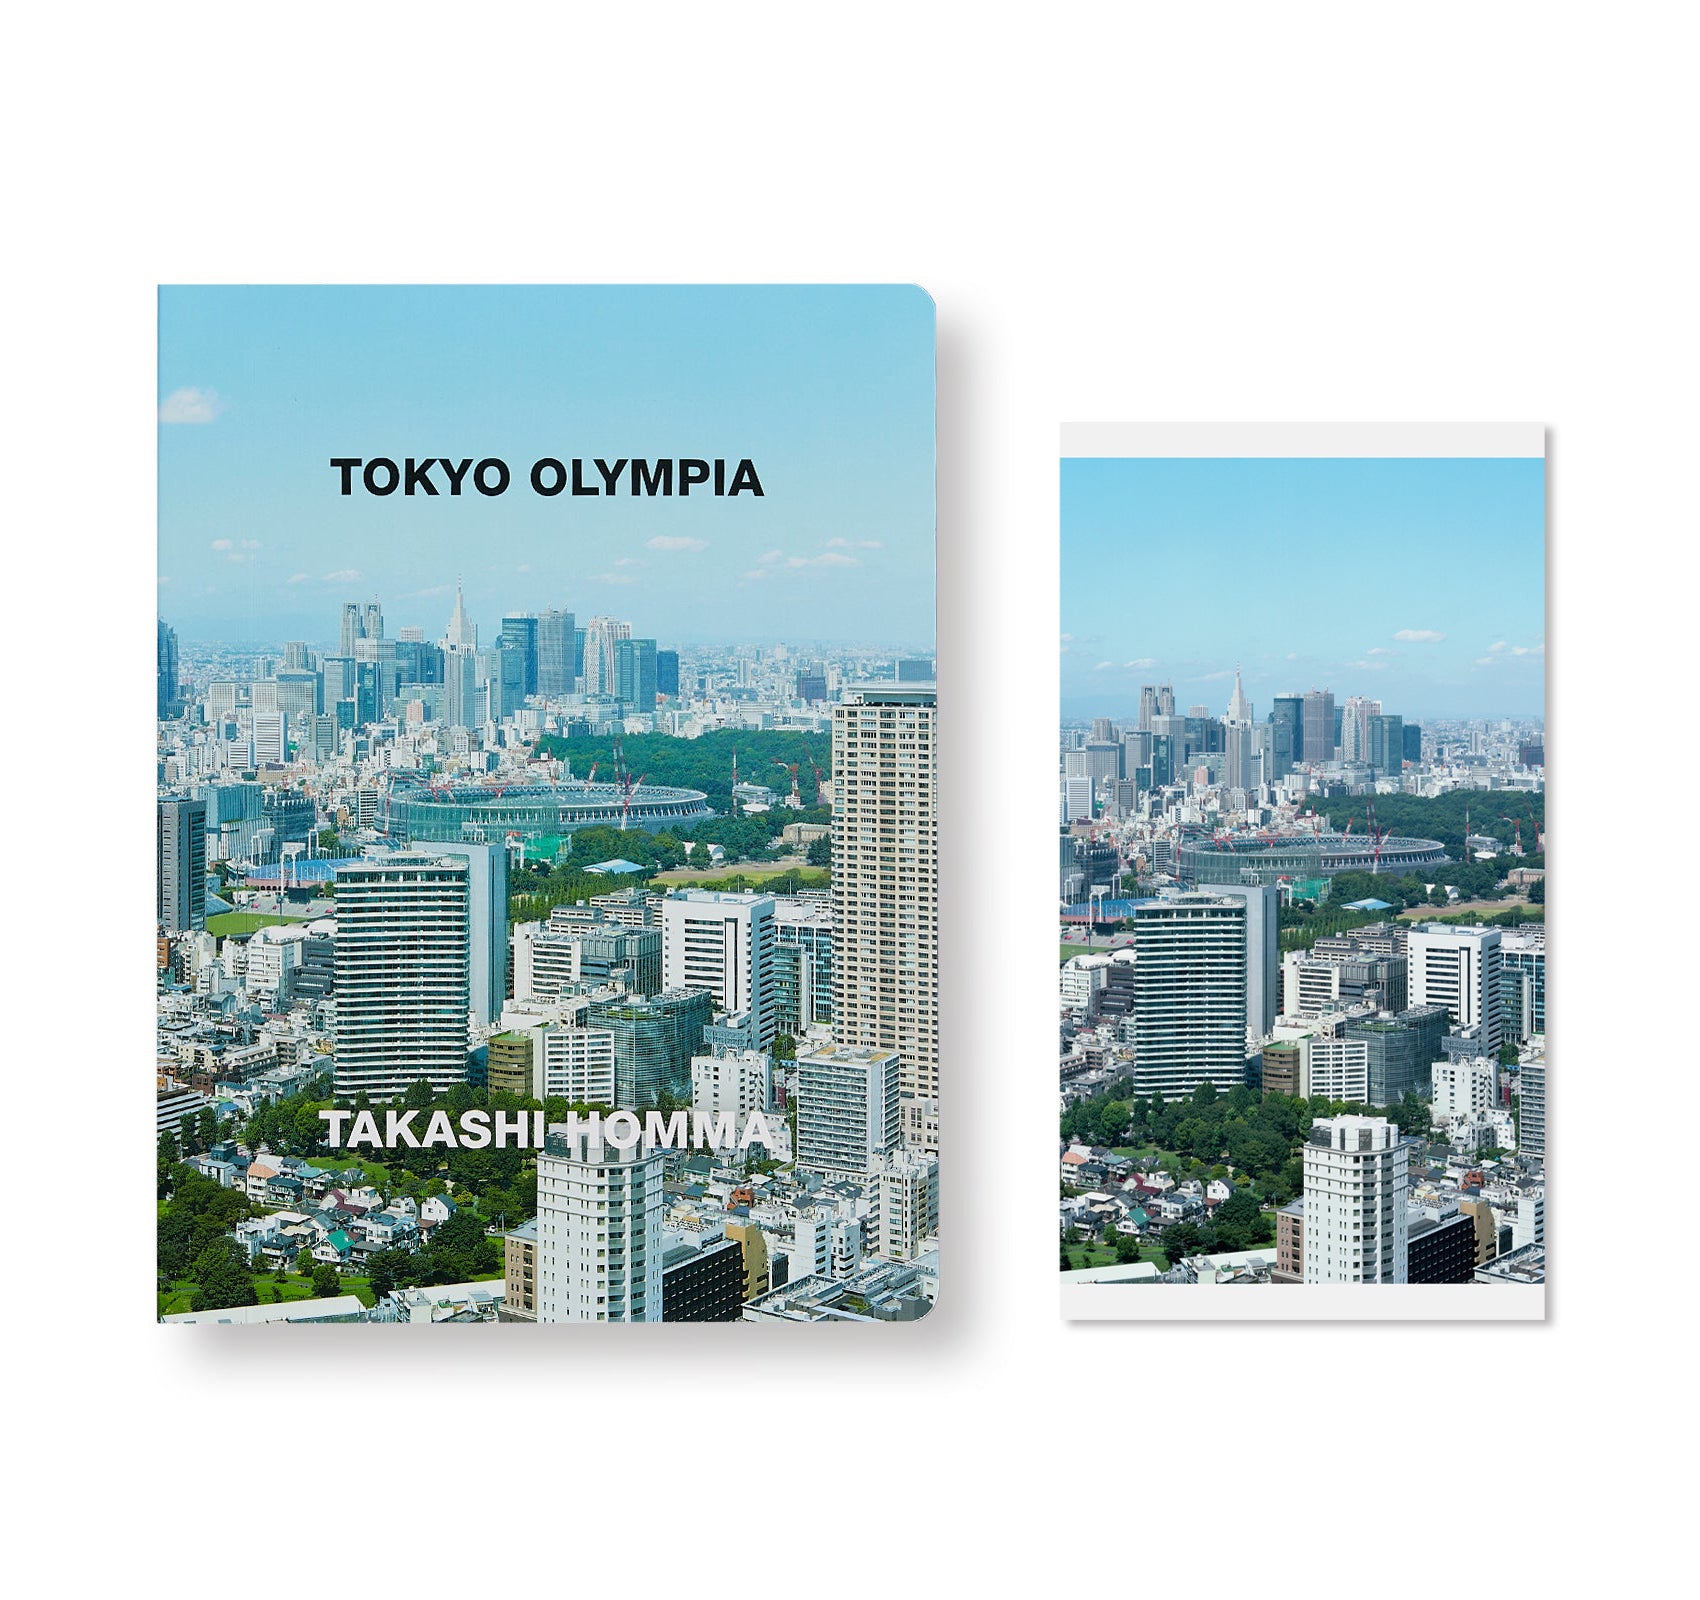 TOKYO OLYMPIA by Takashi Homma [SPECIAL PRINT EDITION]